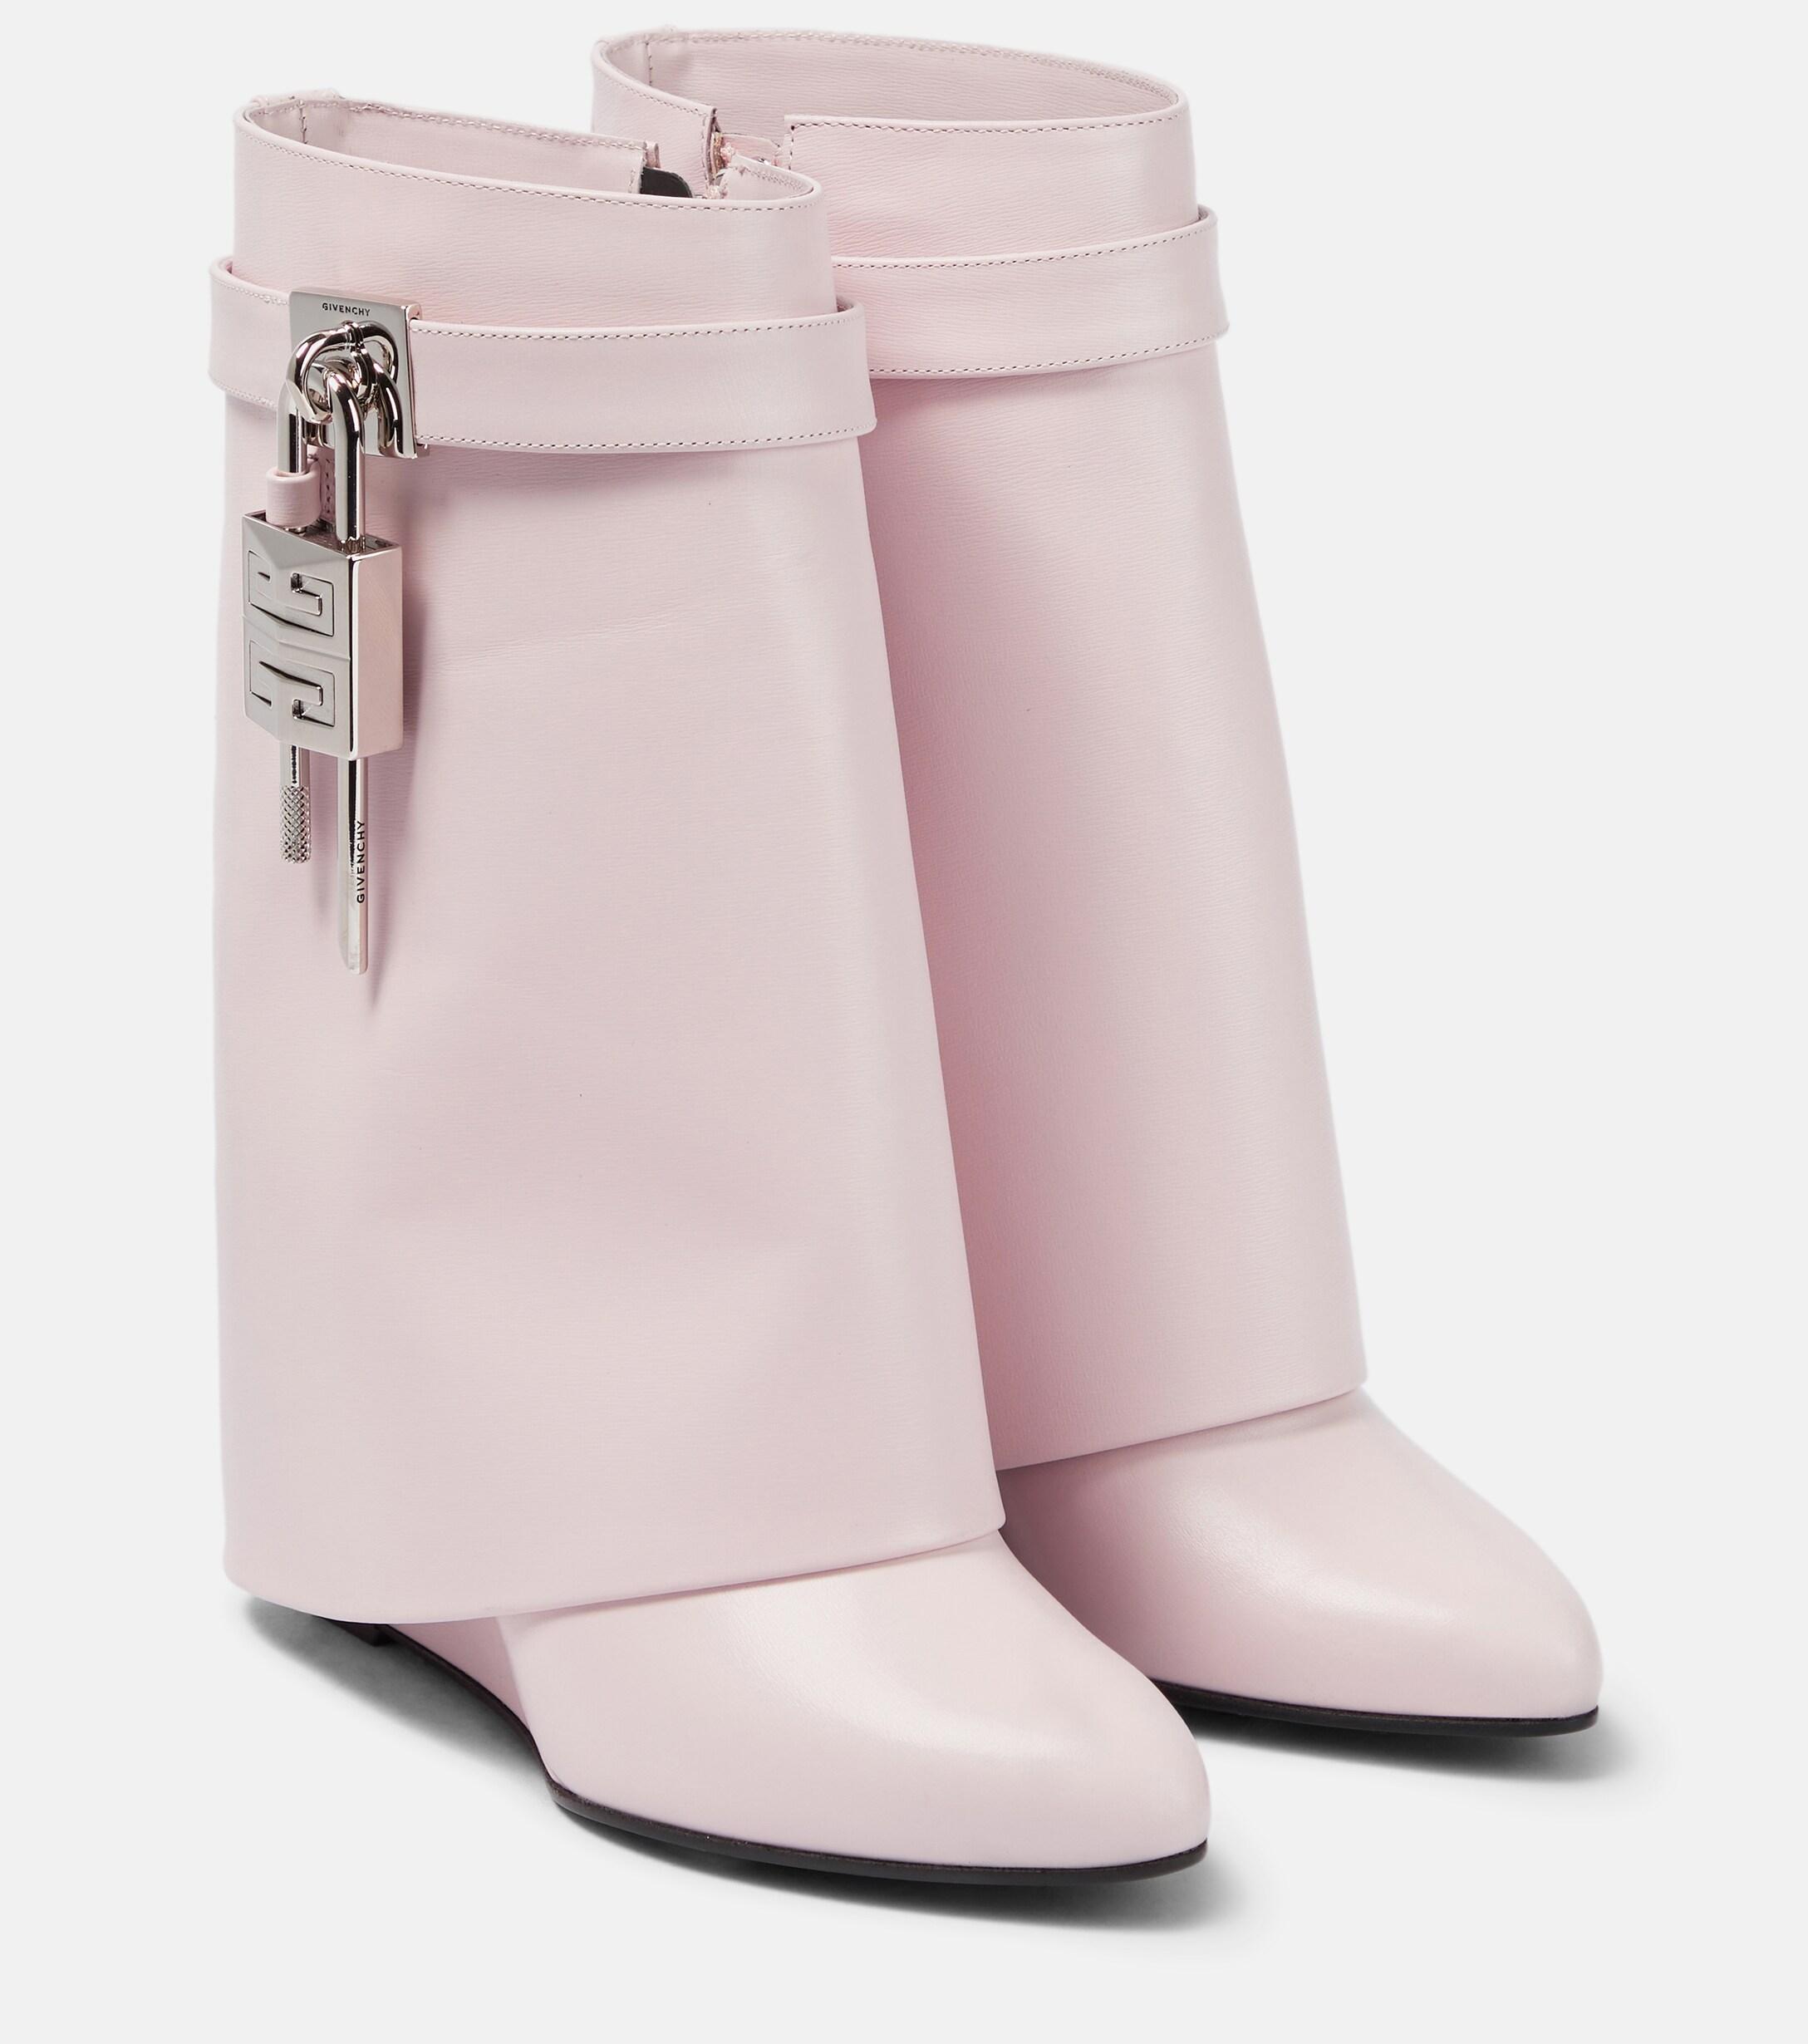 Givenchy Shark Lock Leather Ankle Boots in Pink | Lyst Australia